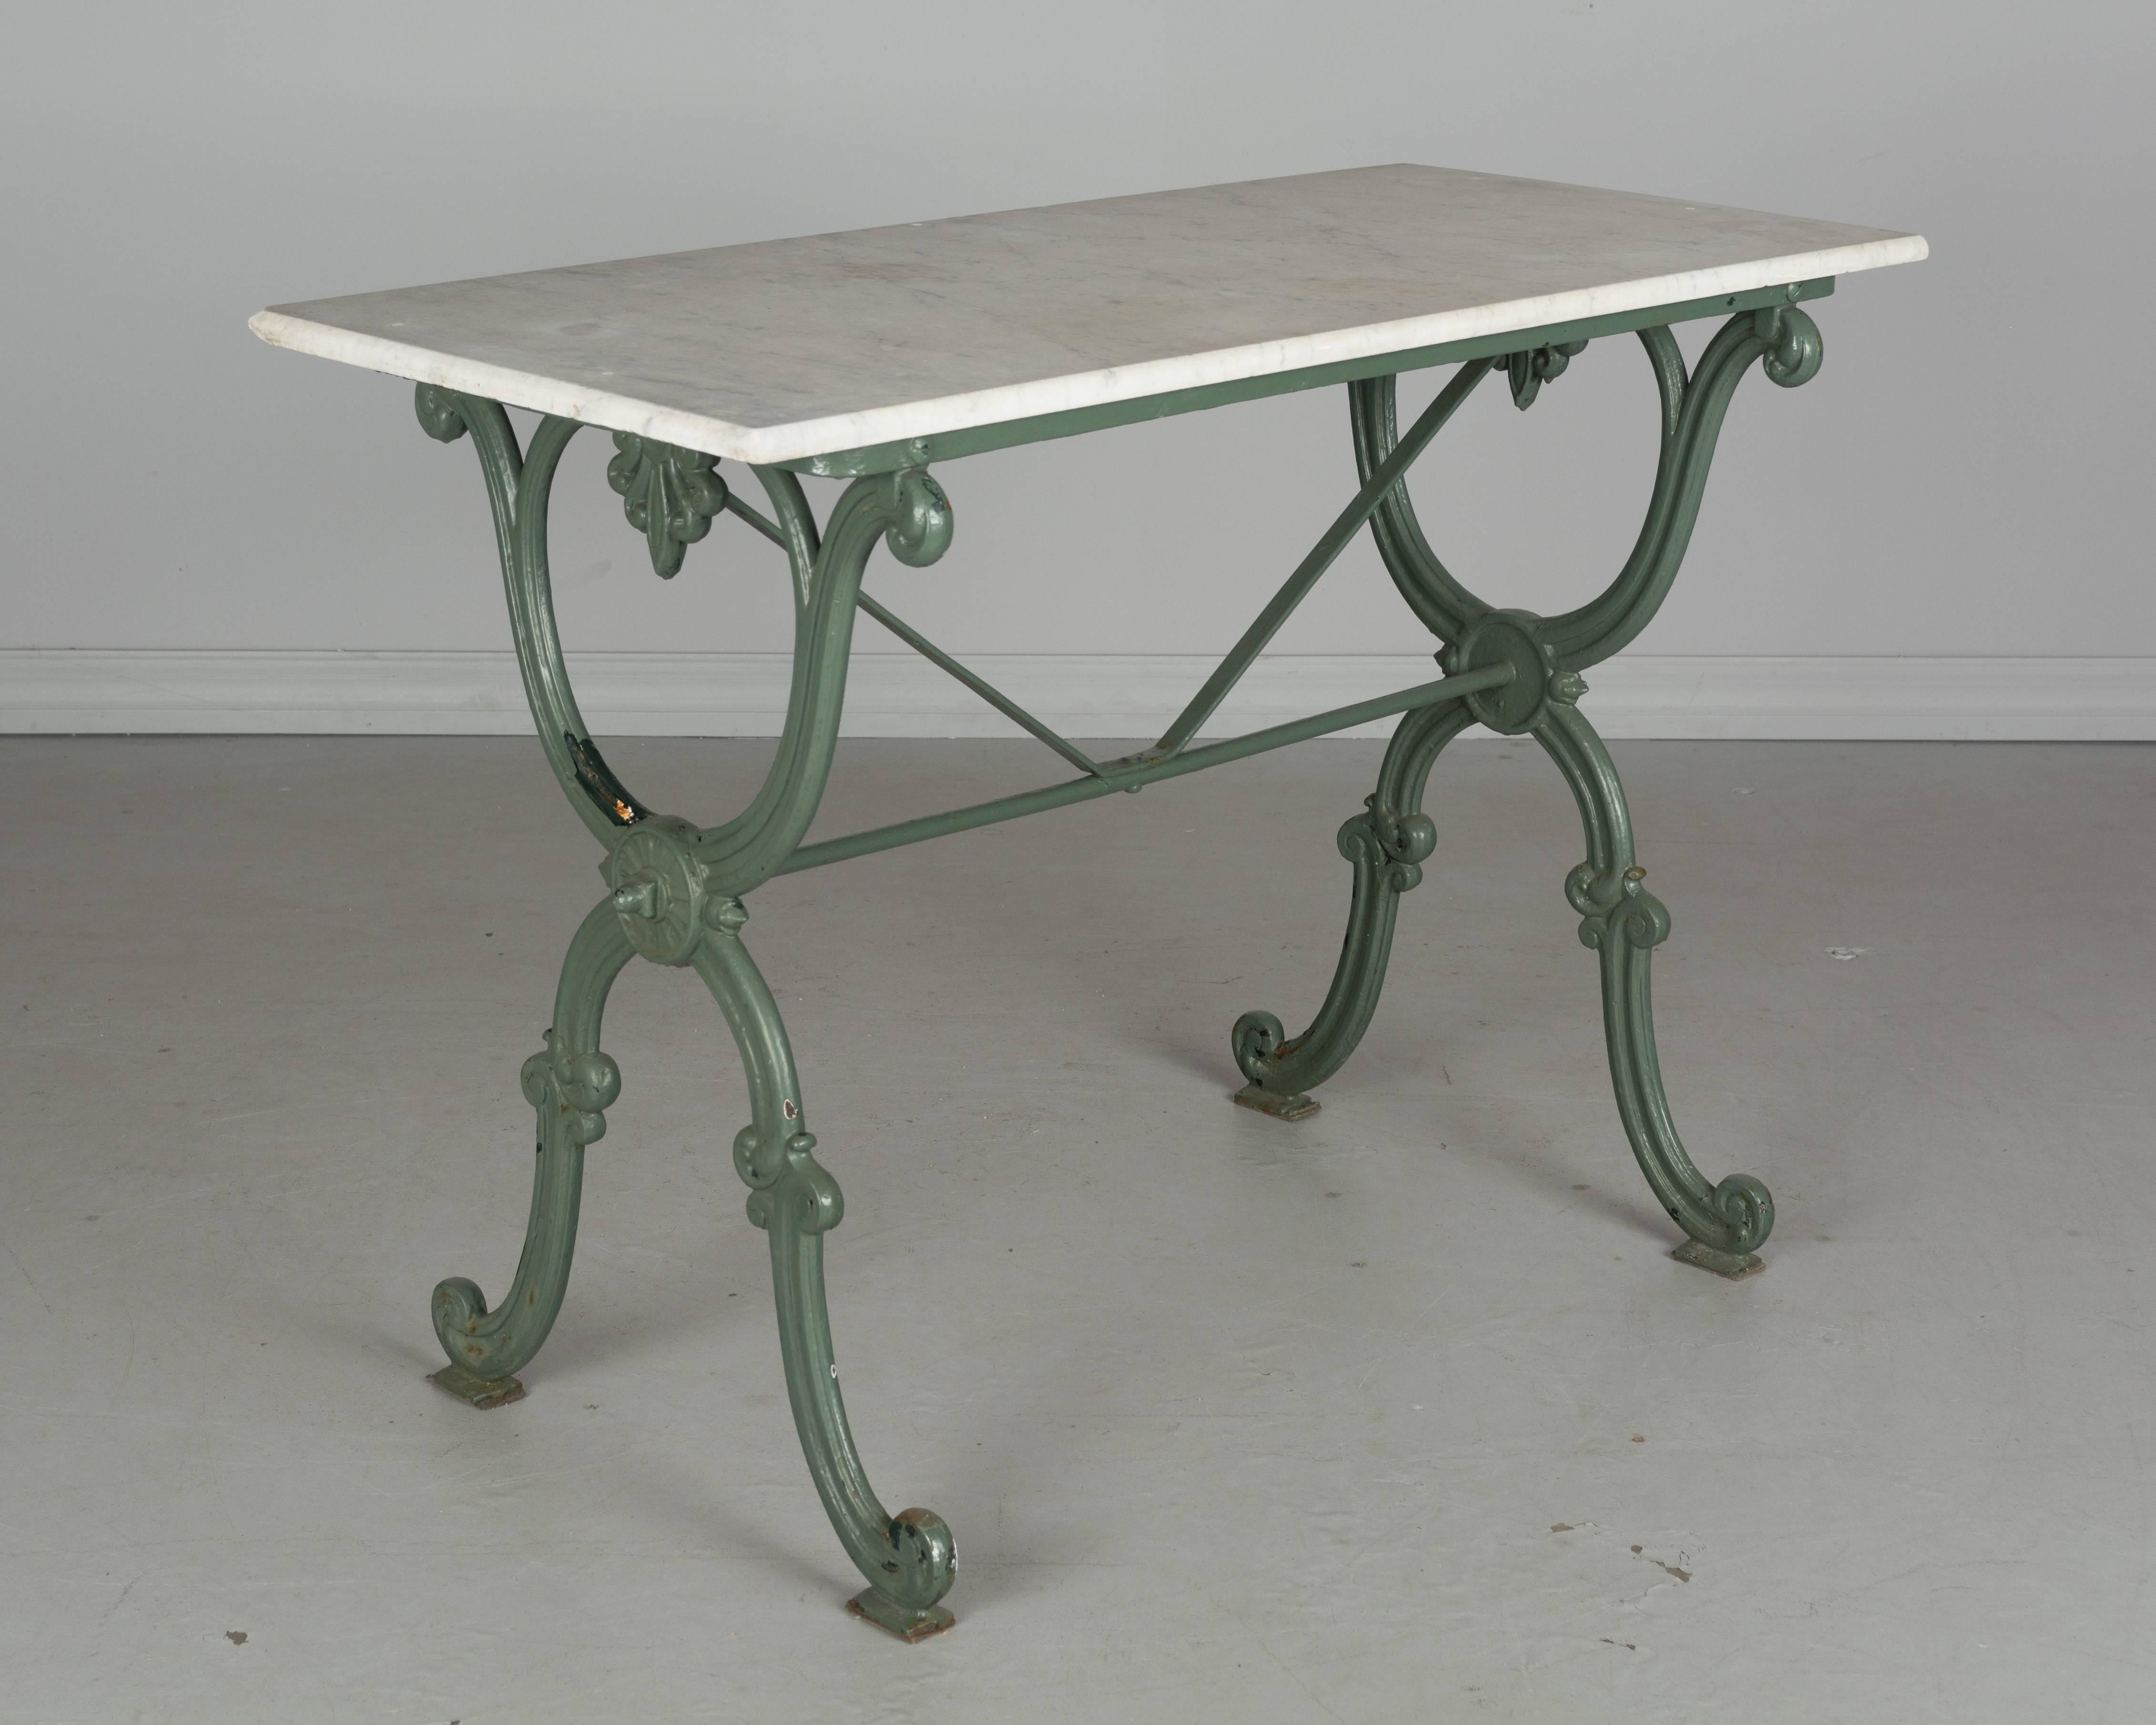 19th century French cast iron bistro table with green painted patina and marble top. Paint has chipped off a bit in a few places revealing previous paint layers of darker green and white. The marble top has been cleaned and holes have been filled